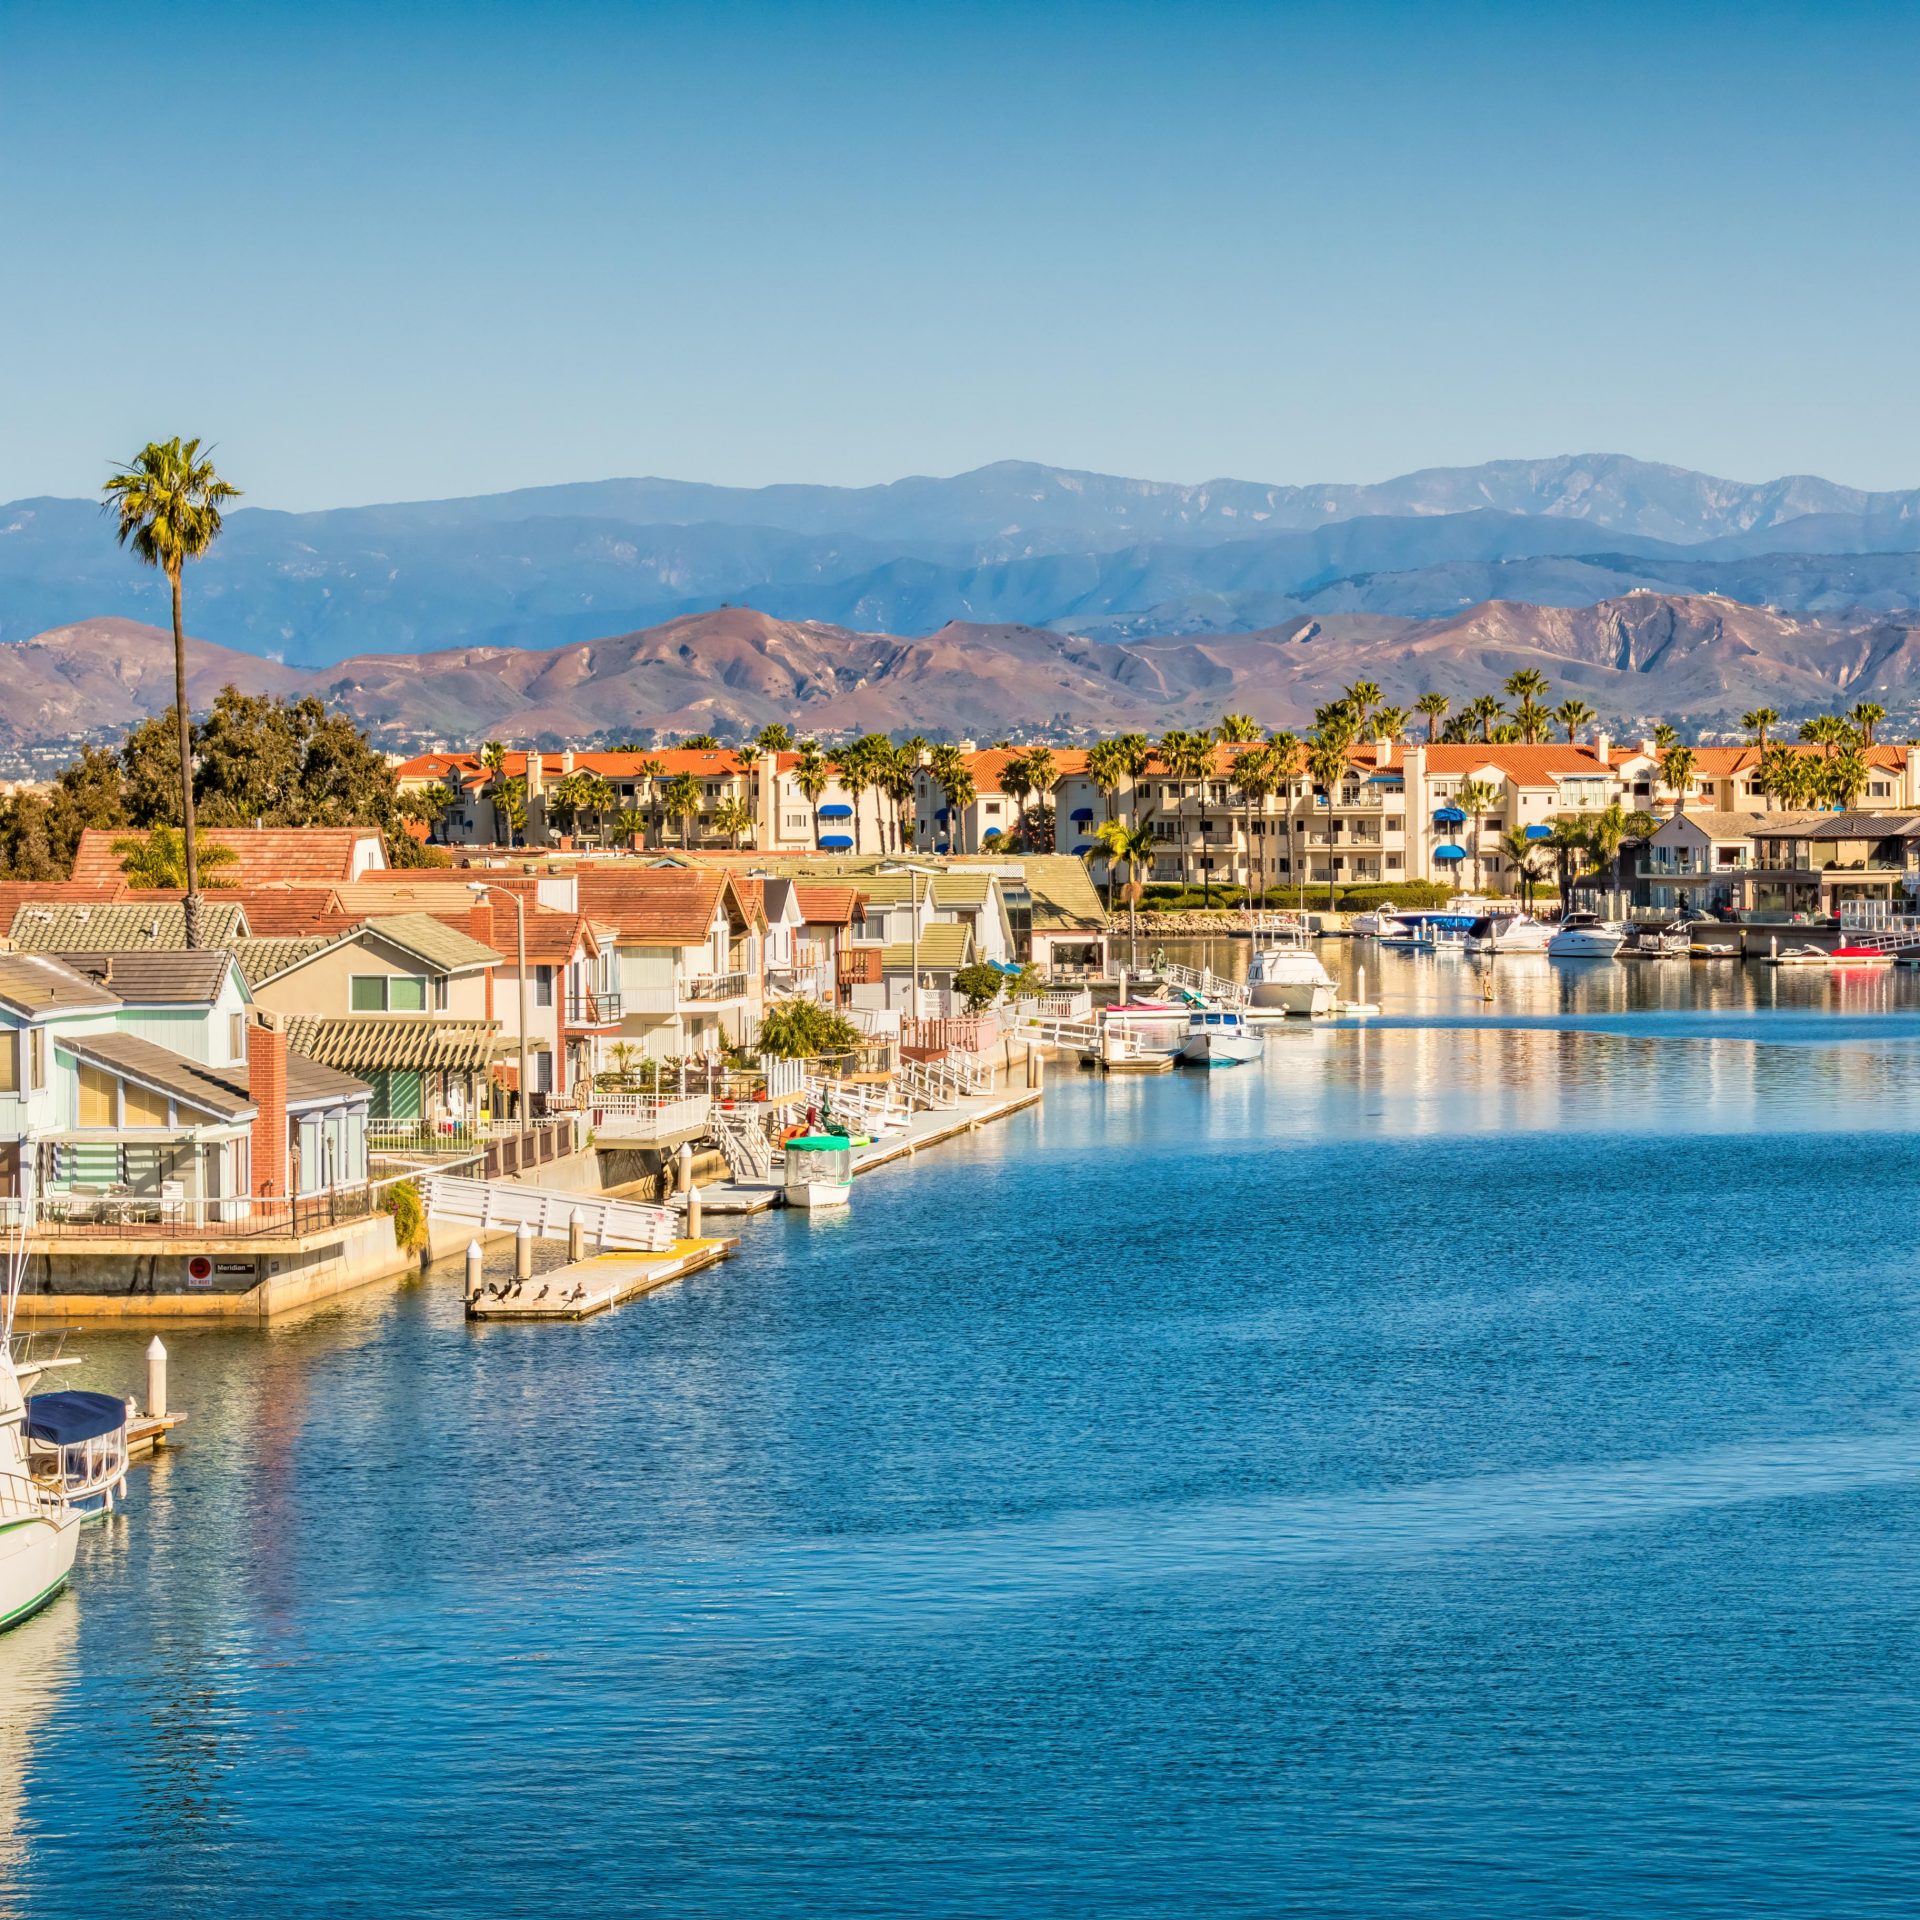 The picture shows a harbour in the city of Oxnard.